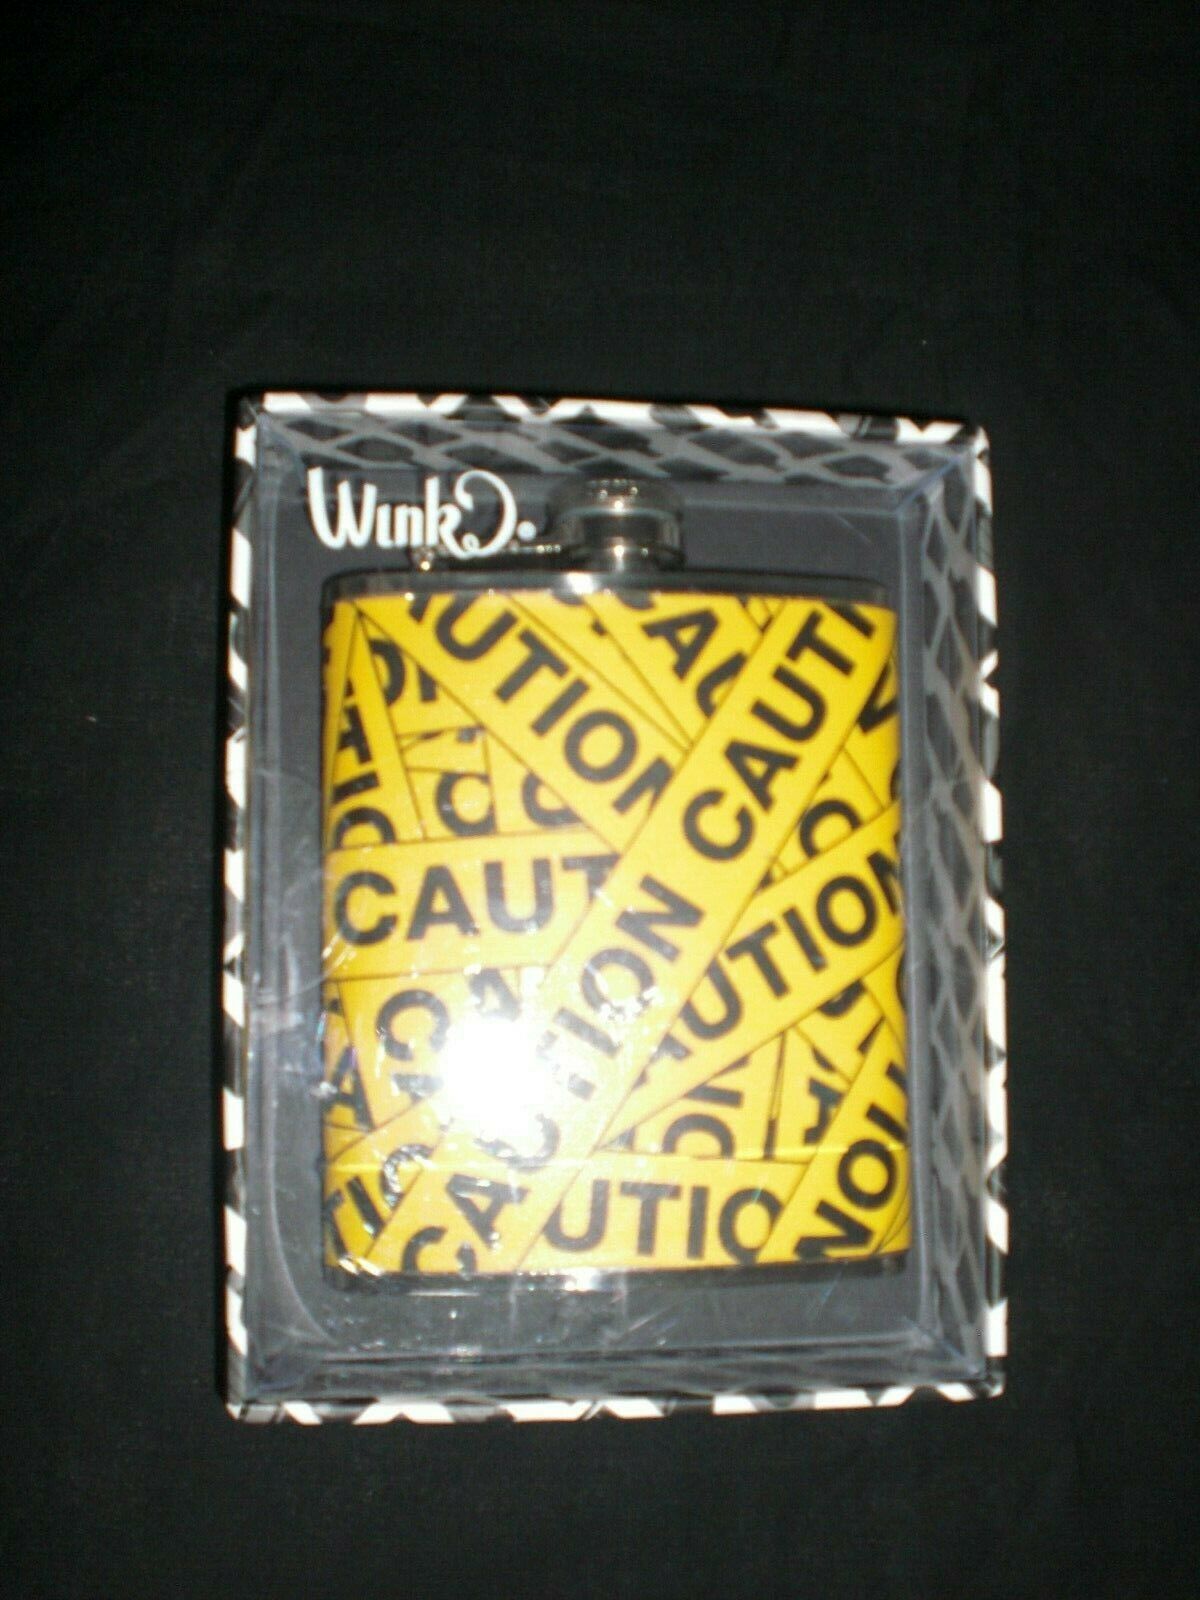 Wink "Caution Tape" 7 Oz. Pint Size Drinking Flask New in Box - $8.99